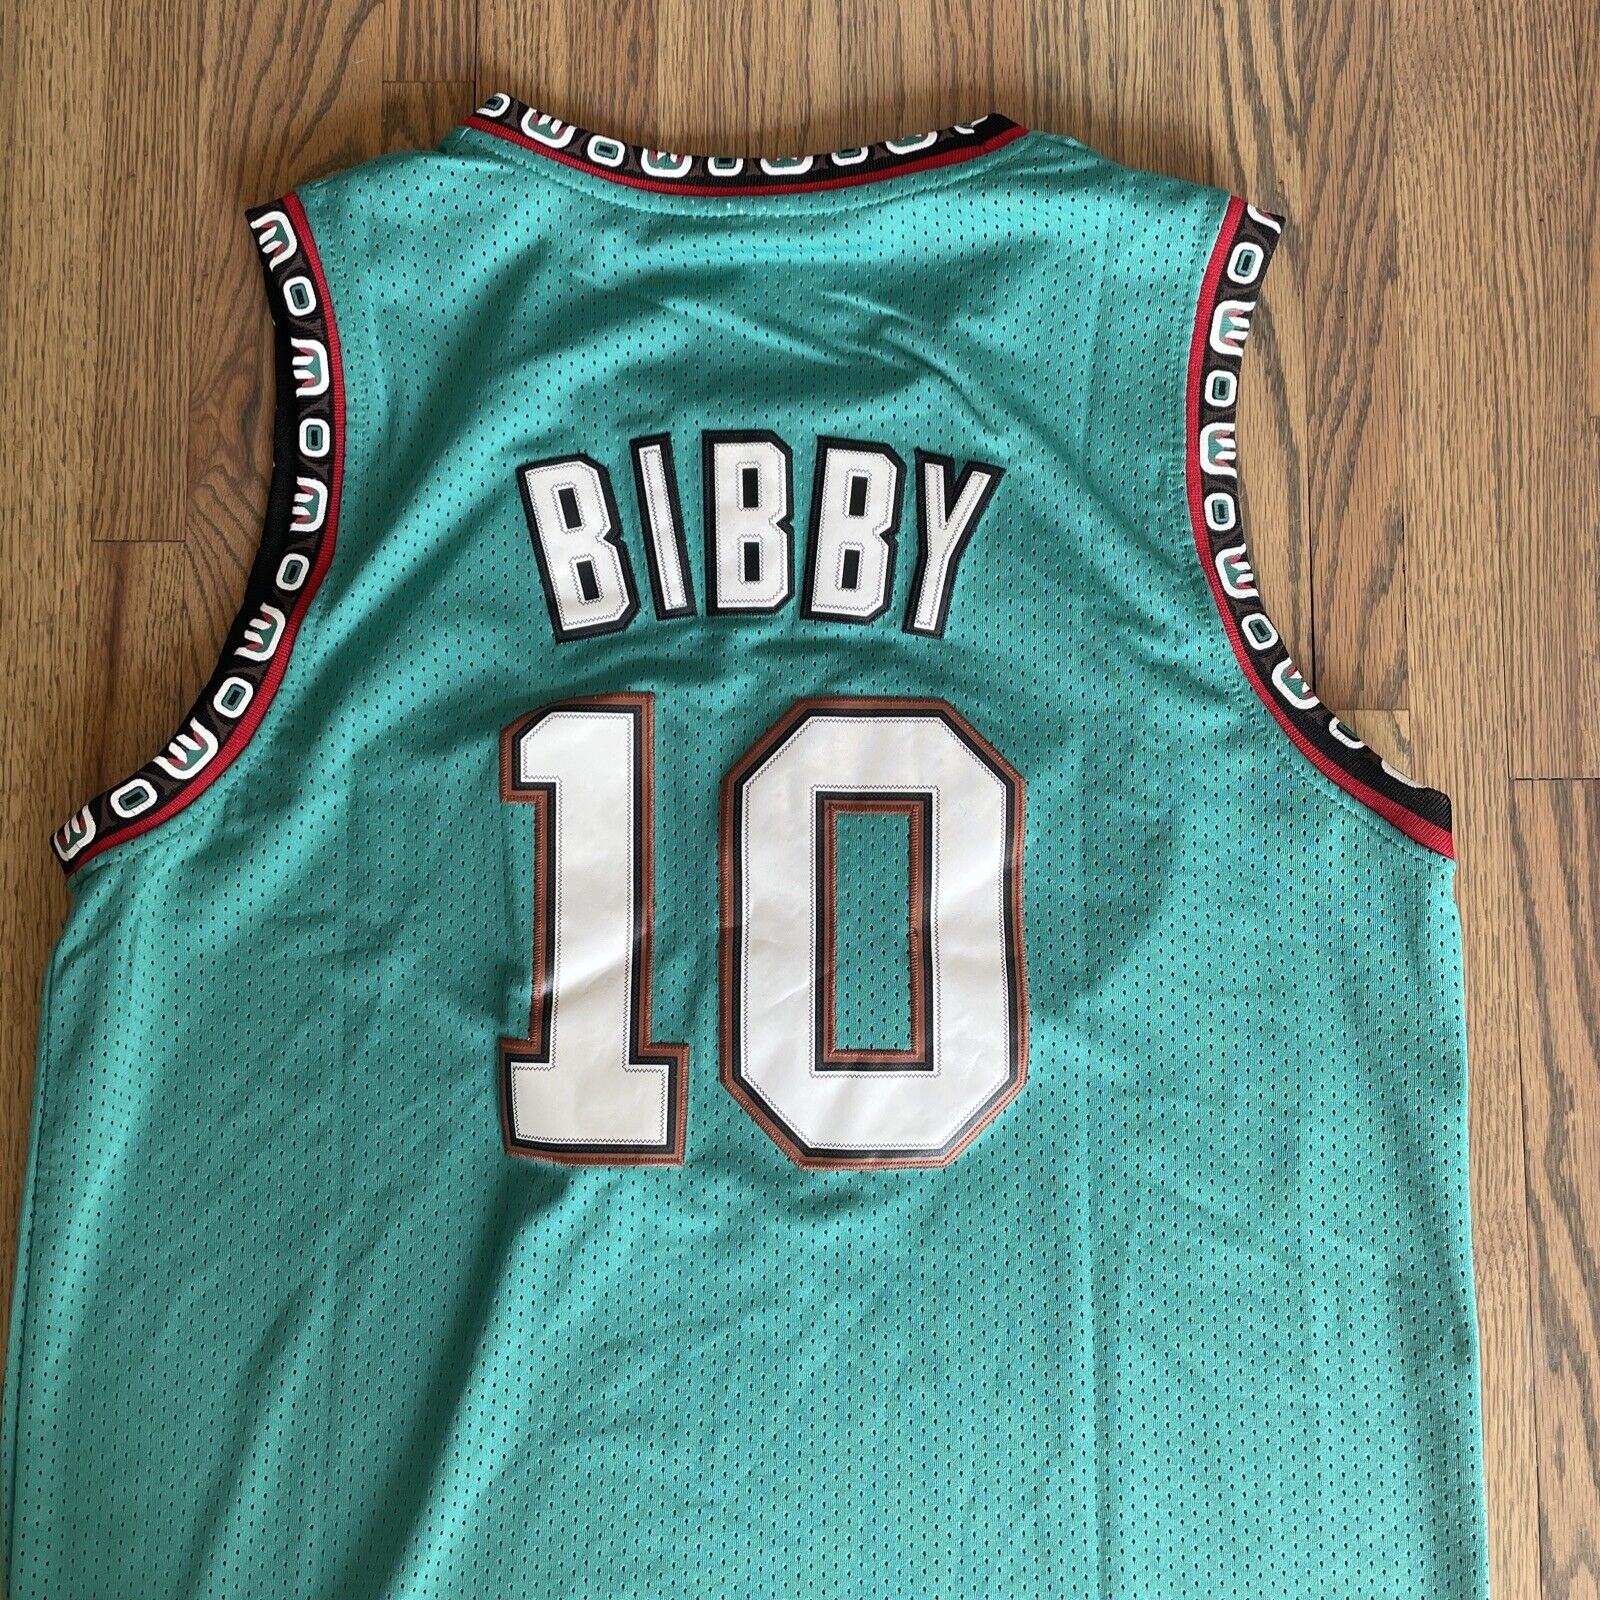 Mike Bibby Vancouver Grizzlies Jersey #10 Med L+2, Adidas Hardwood